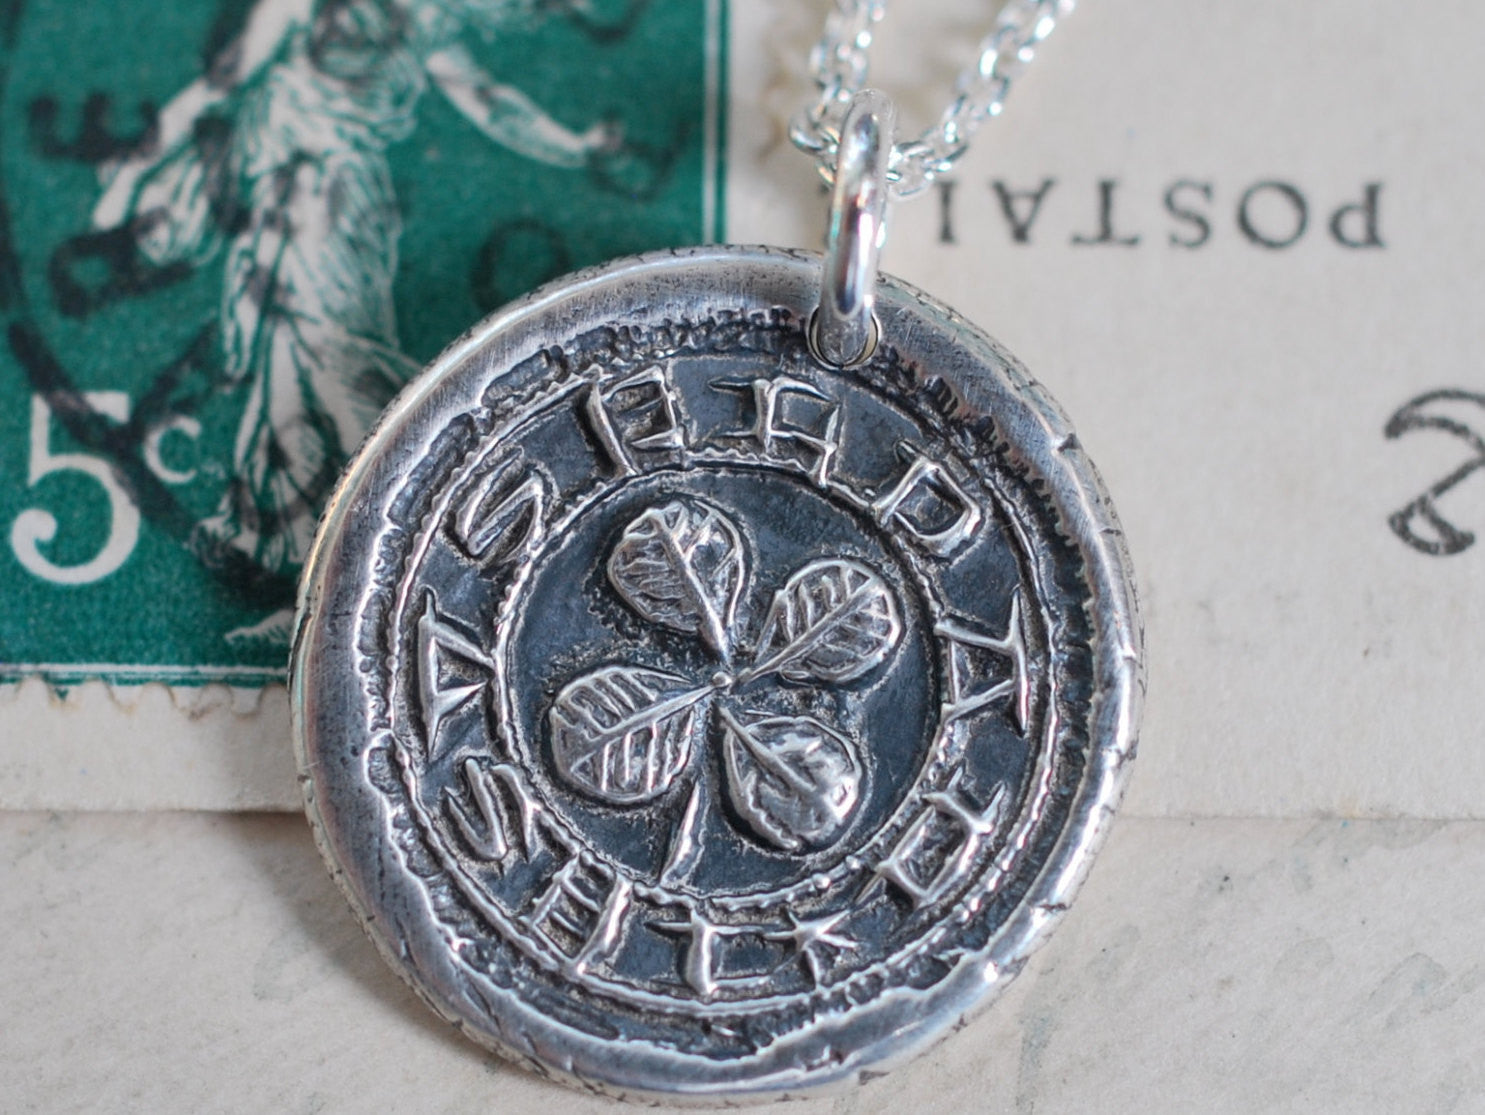 four leaf clover wax seal necklace - medieval wax seal jewelry